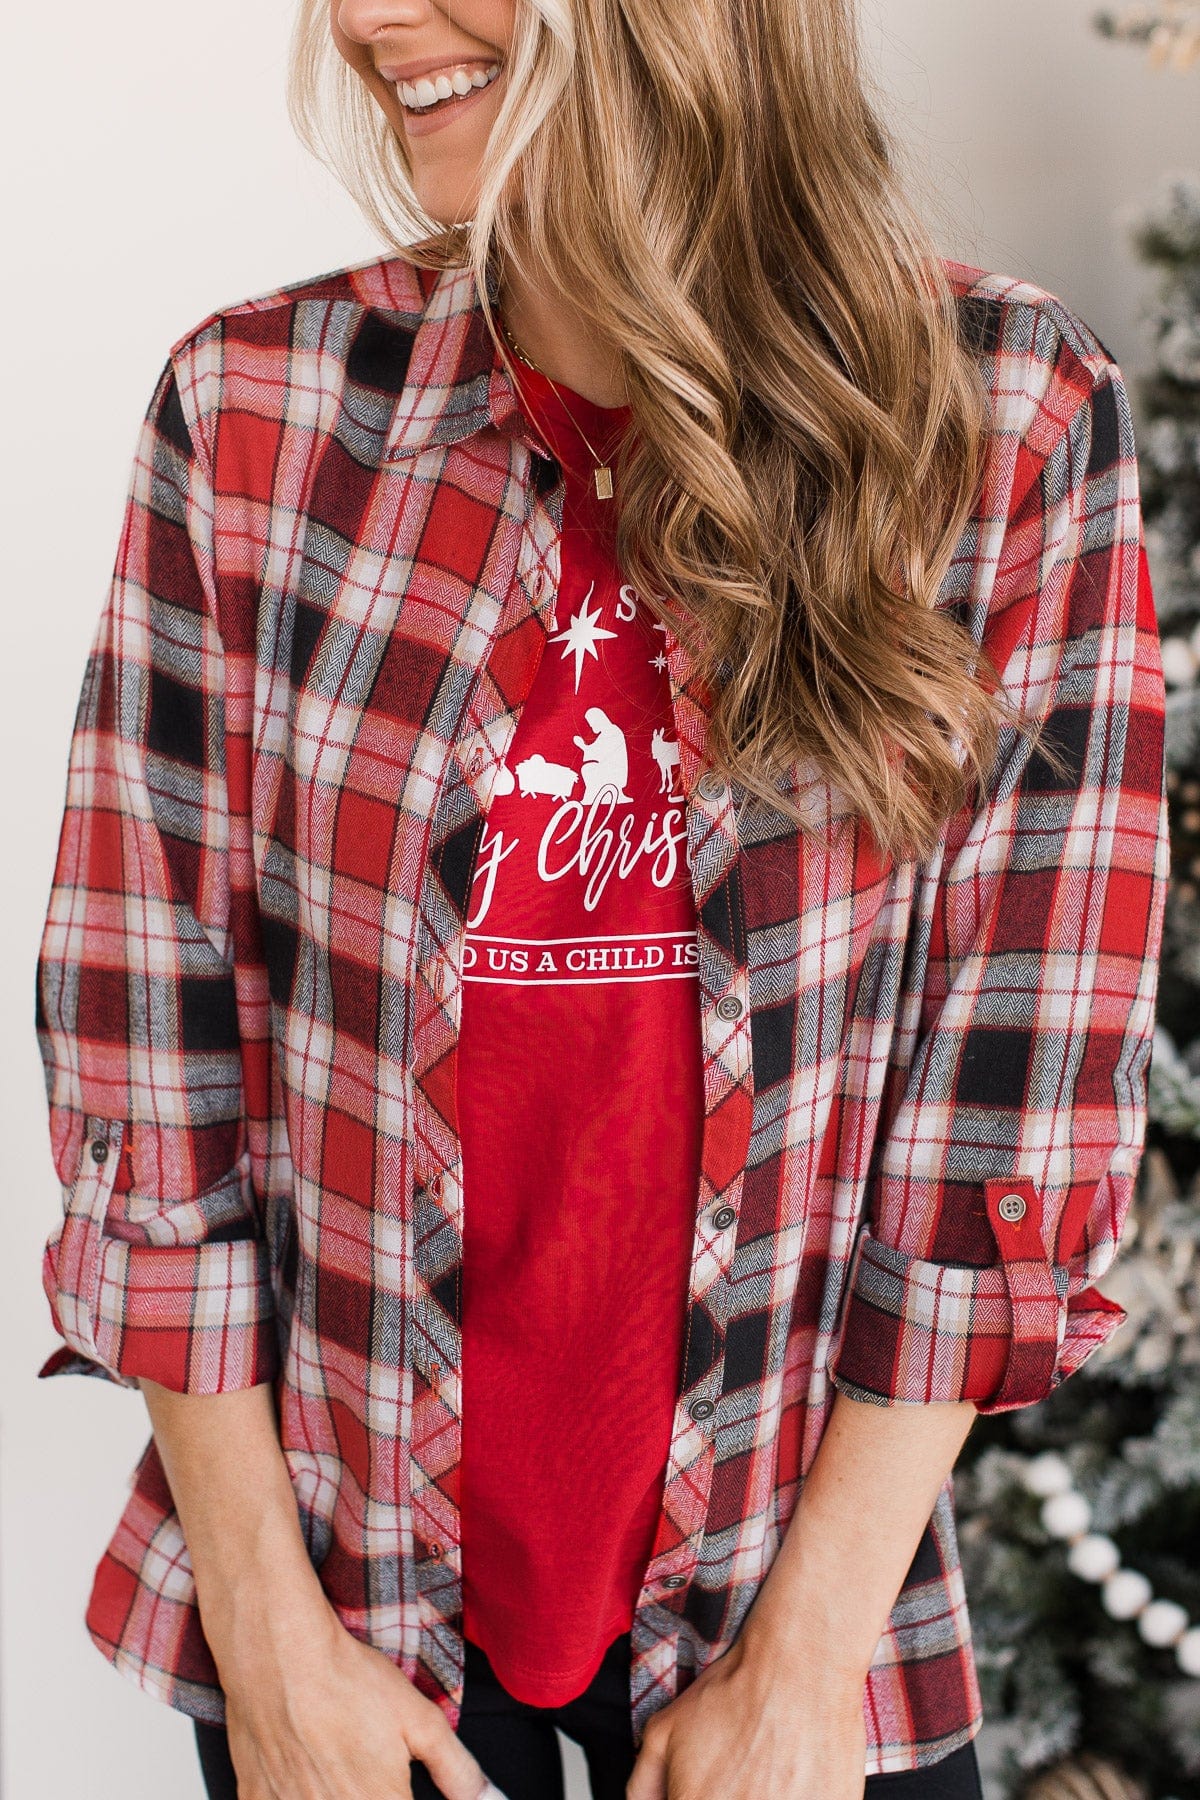 Lovely Seeing You Button Down Flannel- Red & Black